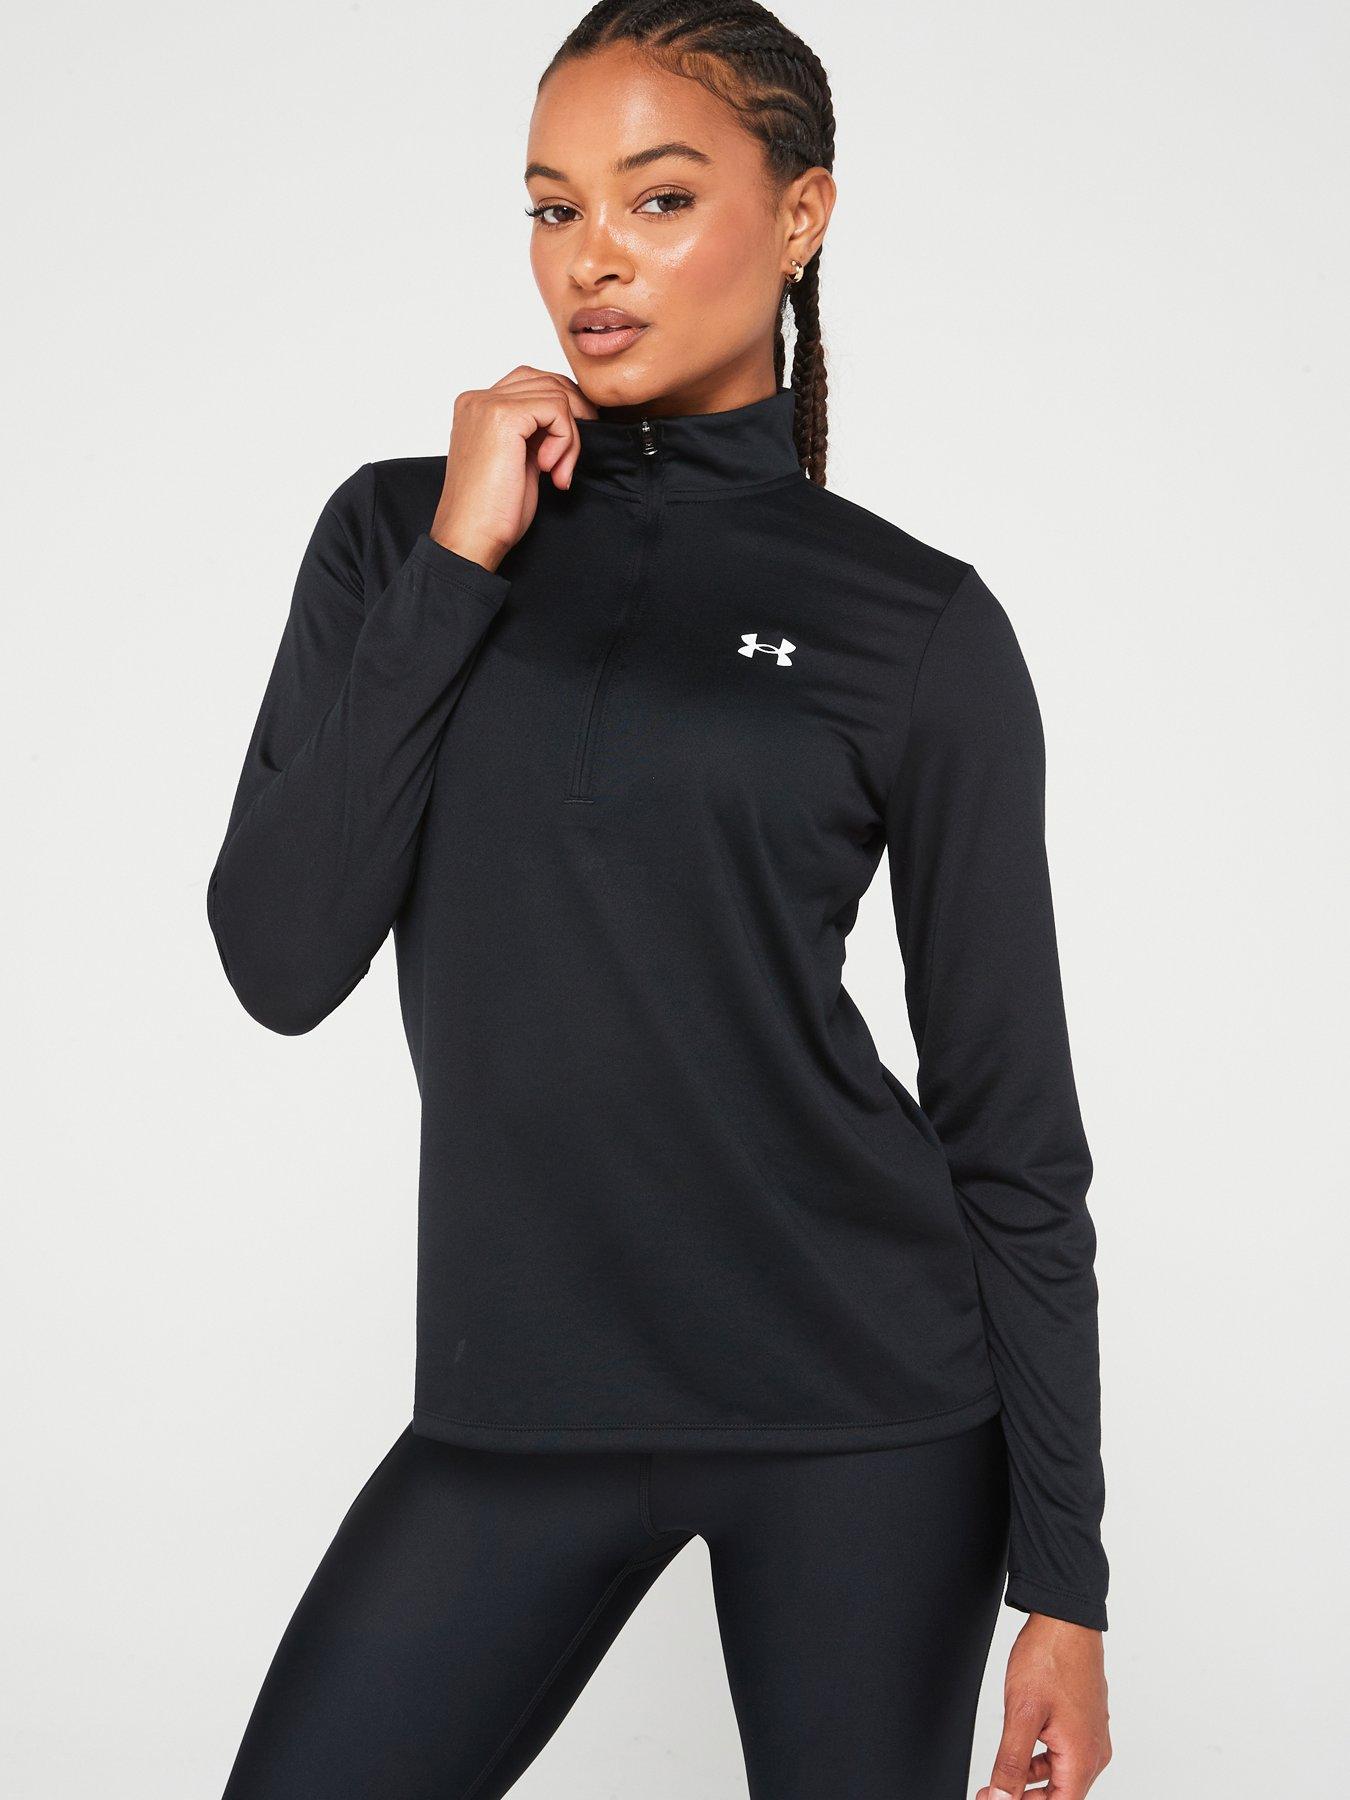 Under armour, T-shirts, Womens sports clothing, Sports & leisure